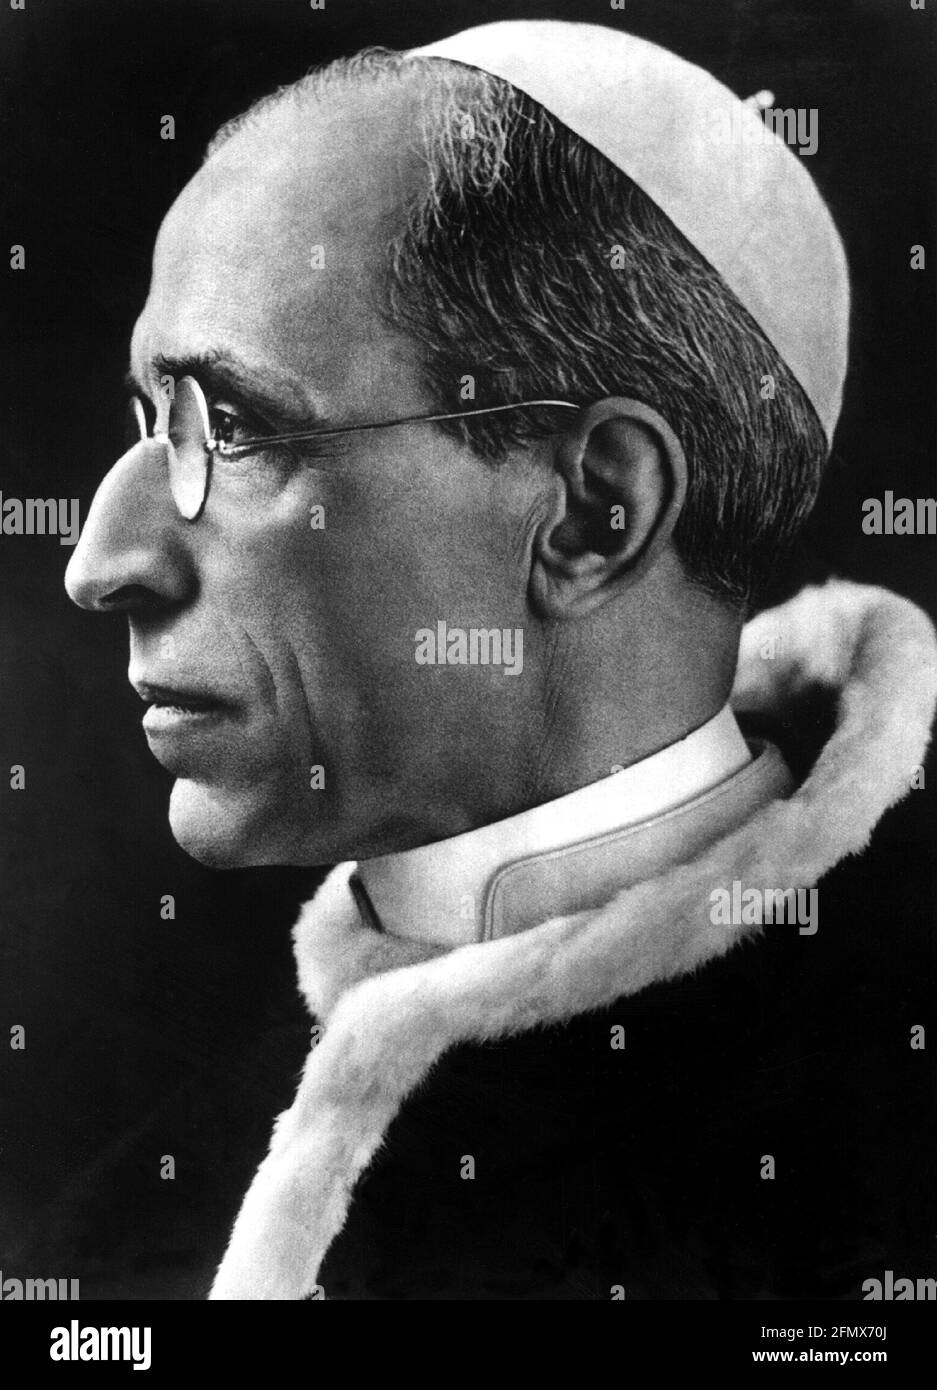 Pius XII (Eugenio Pacelli), 2.3.1876 - 9.10.1958, Pope 2.3.1939 - 9.10.1958, portrait, circa 1940, ADDITIONAL-RIGHTS-CLEARANCE-INFO-NOT-AVAILABLE Stock Photo